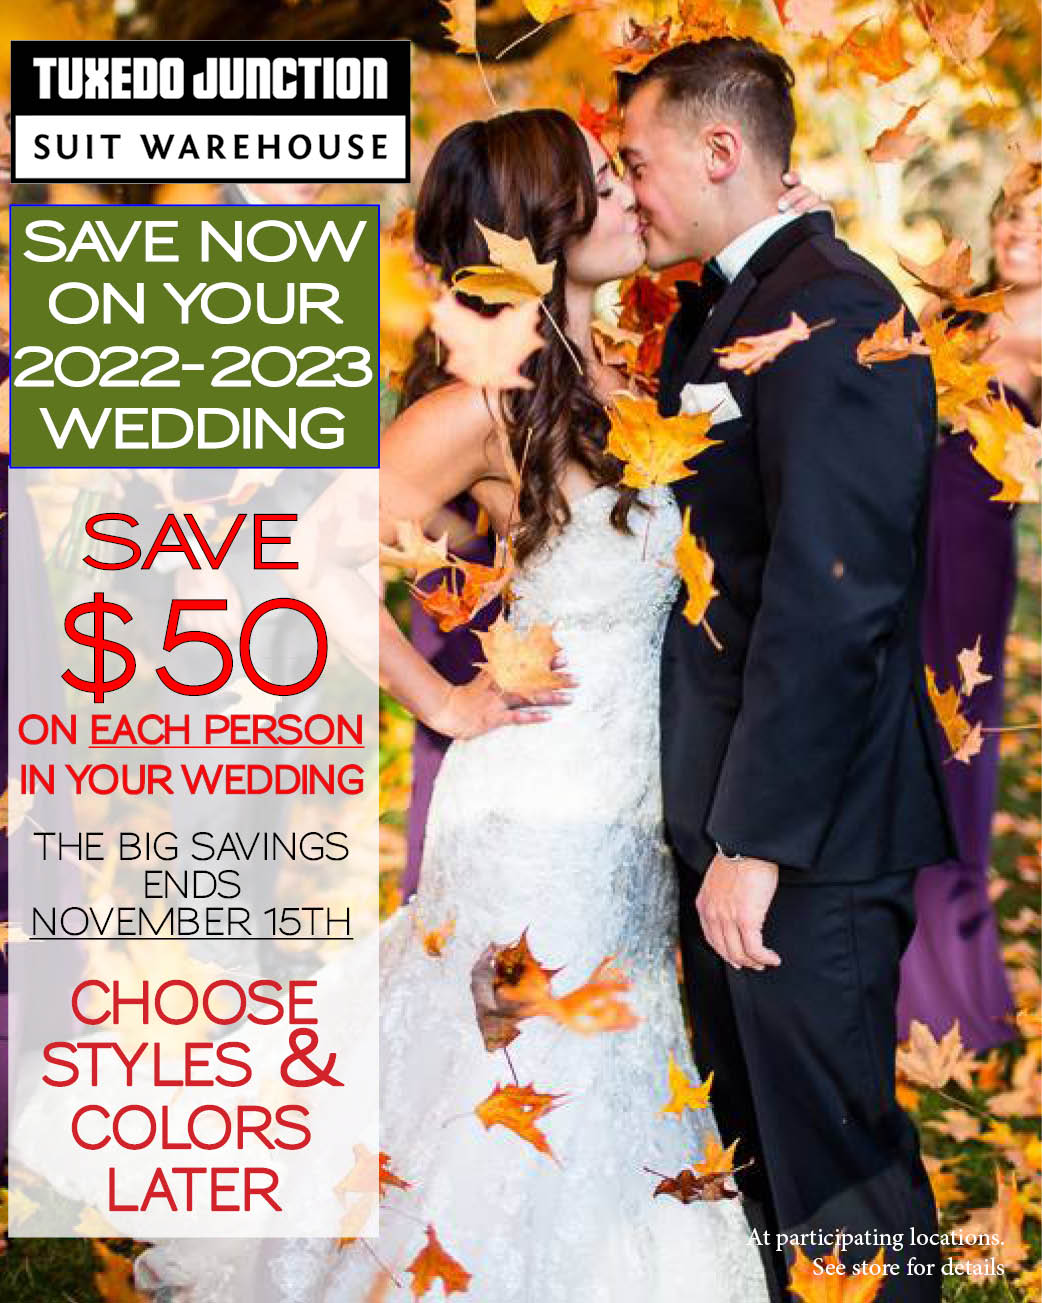 Reserve your wedding NOW and save $70 off suits and tuxes